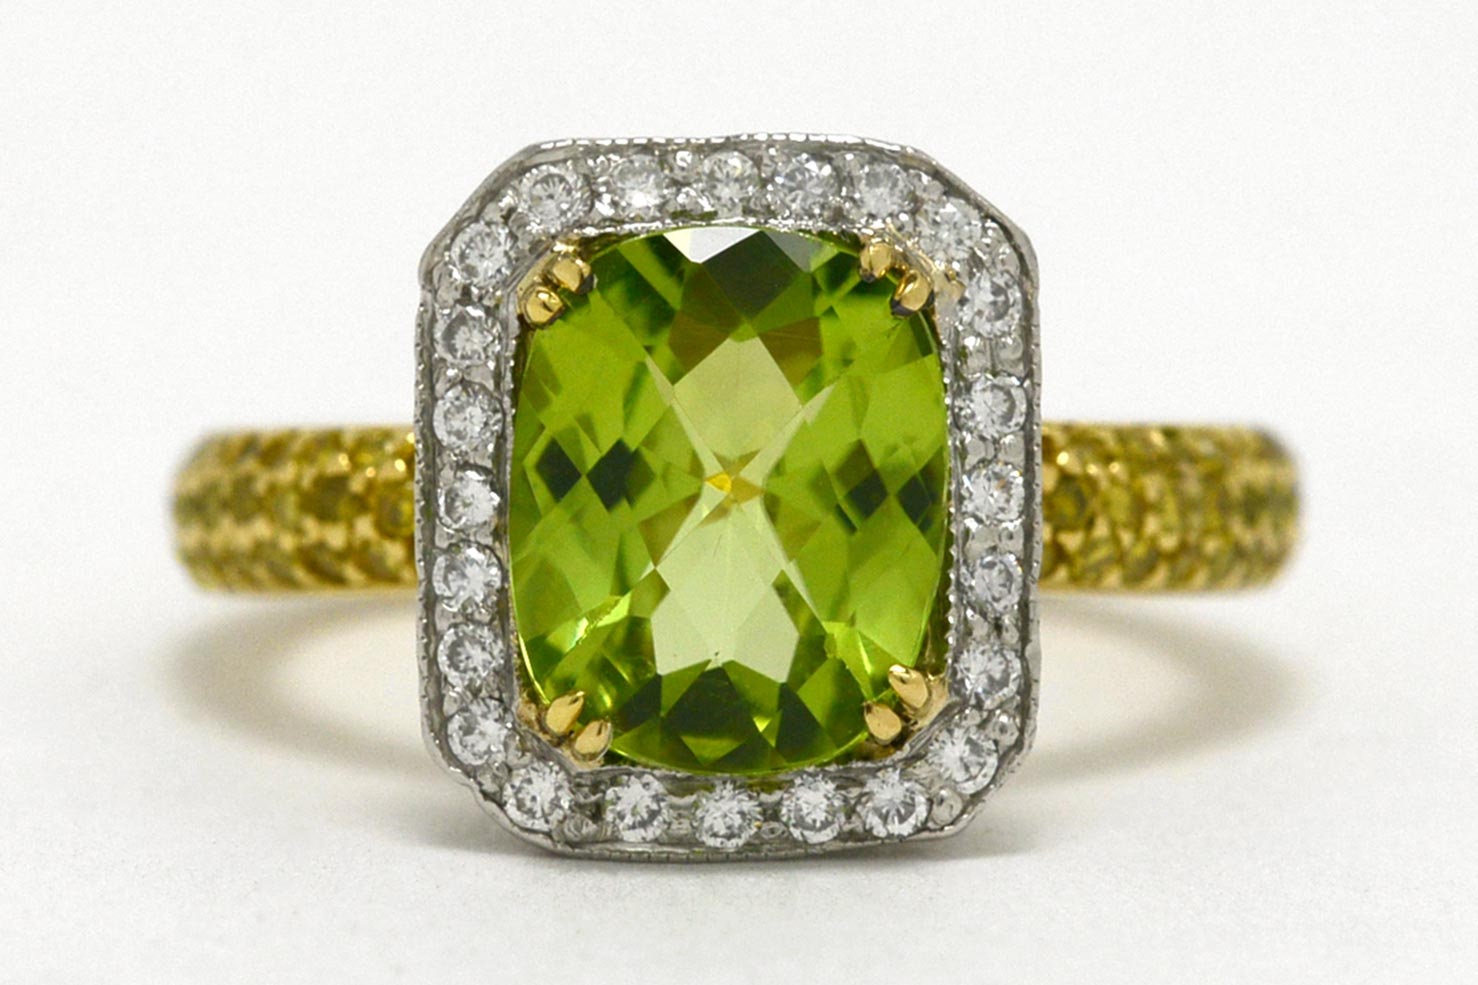 Peridot Diamond Halo Heirloom Vintage Engagement Ring Etruscan Revival Platinum 18K Yellow Gold 2 Tone Undercrown Green Gem Cocktail Jewelry